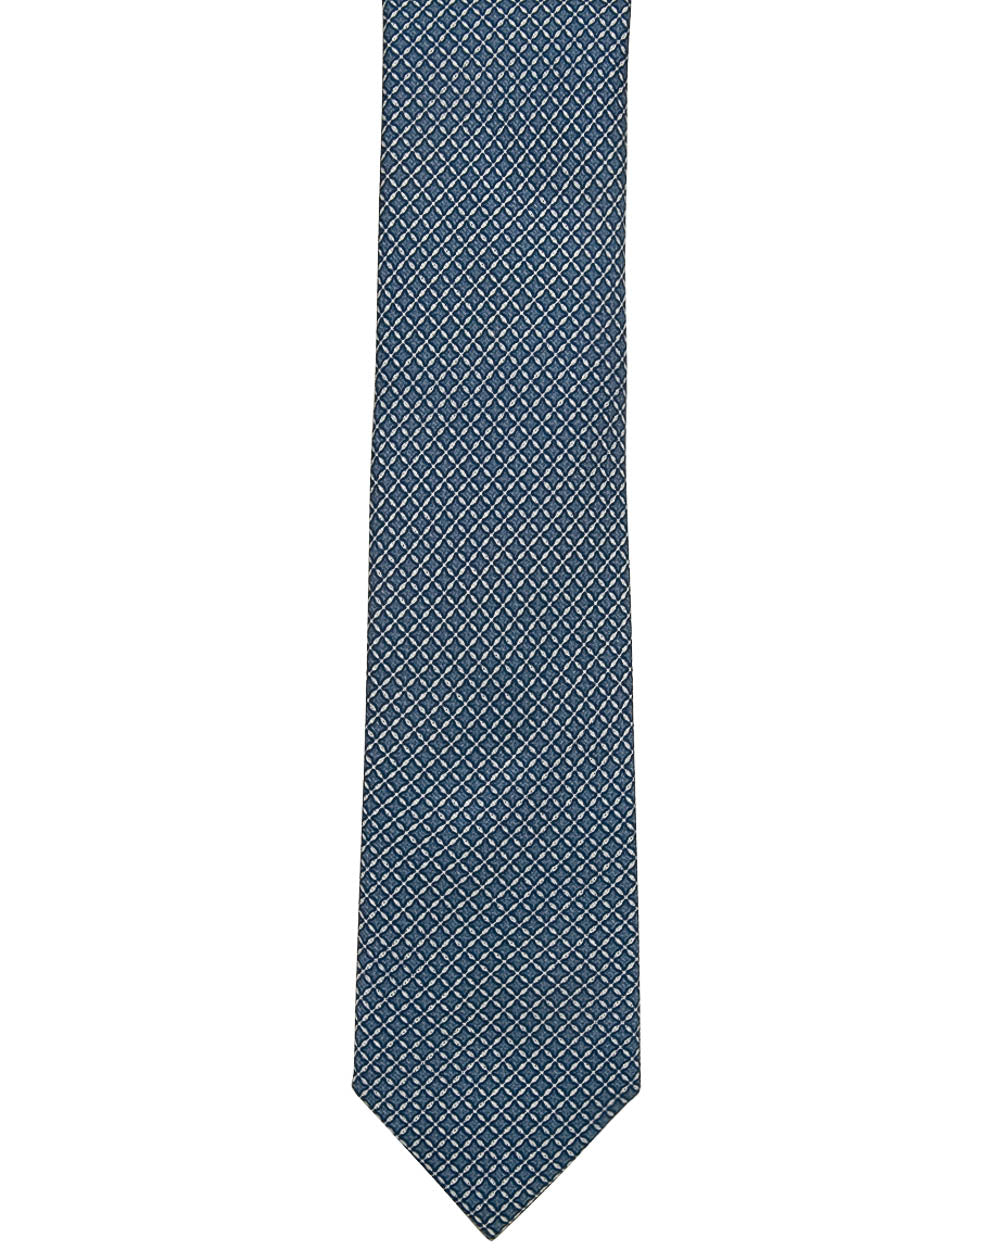 Blue and White Geometric Tie